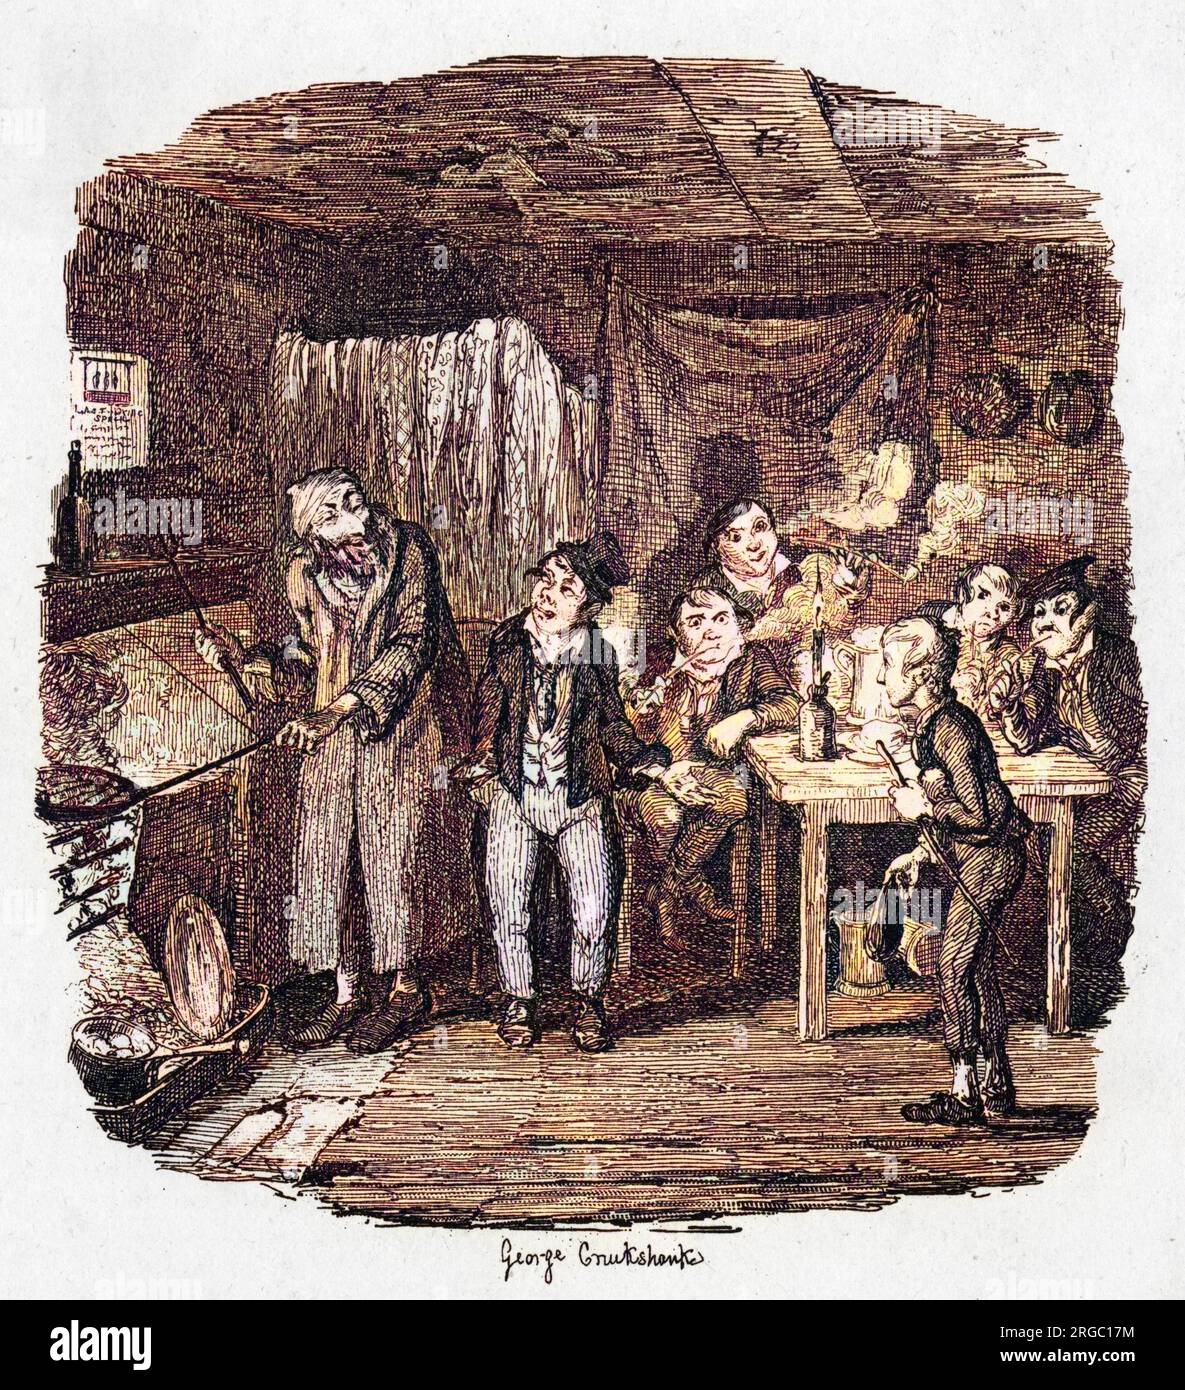 1885 illustration - Oliver Twist The story of an orphan Oliver Twist, who  is sold into apprenticeship with an undertaker. After escaping he travels  to London, where he meets the Artful Dodger